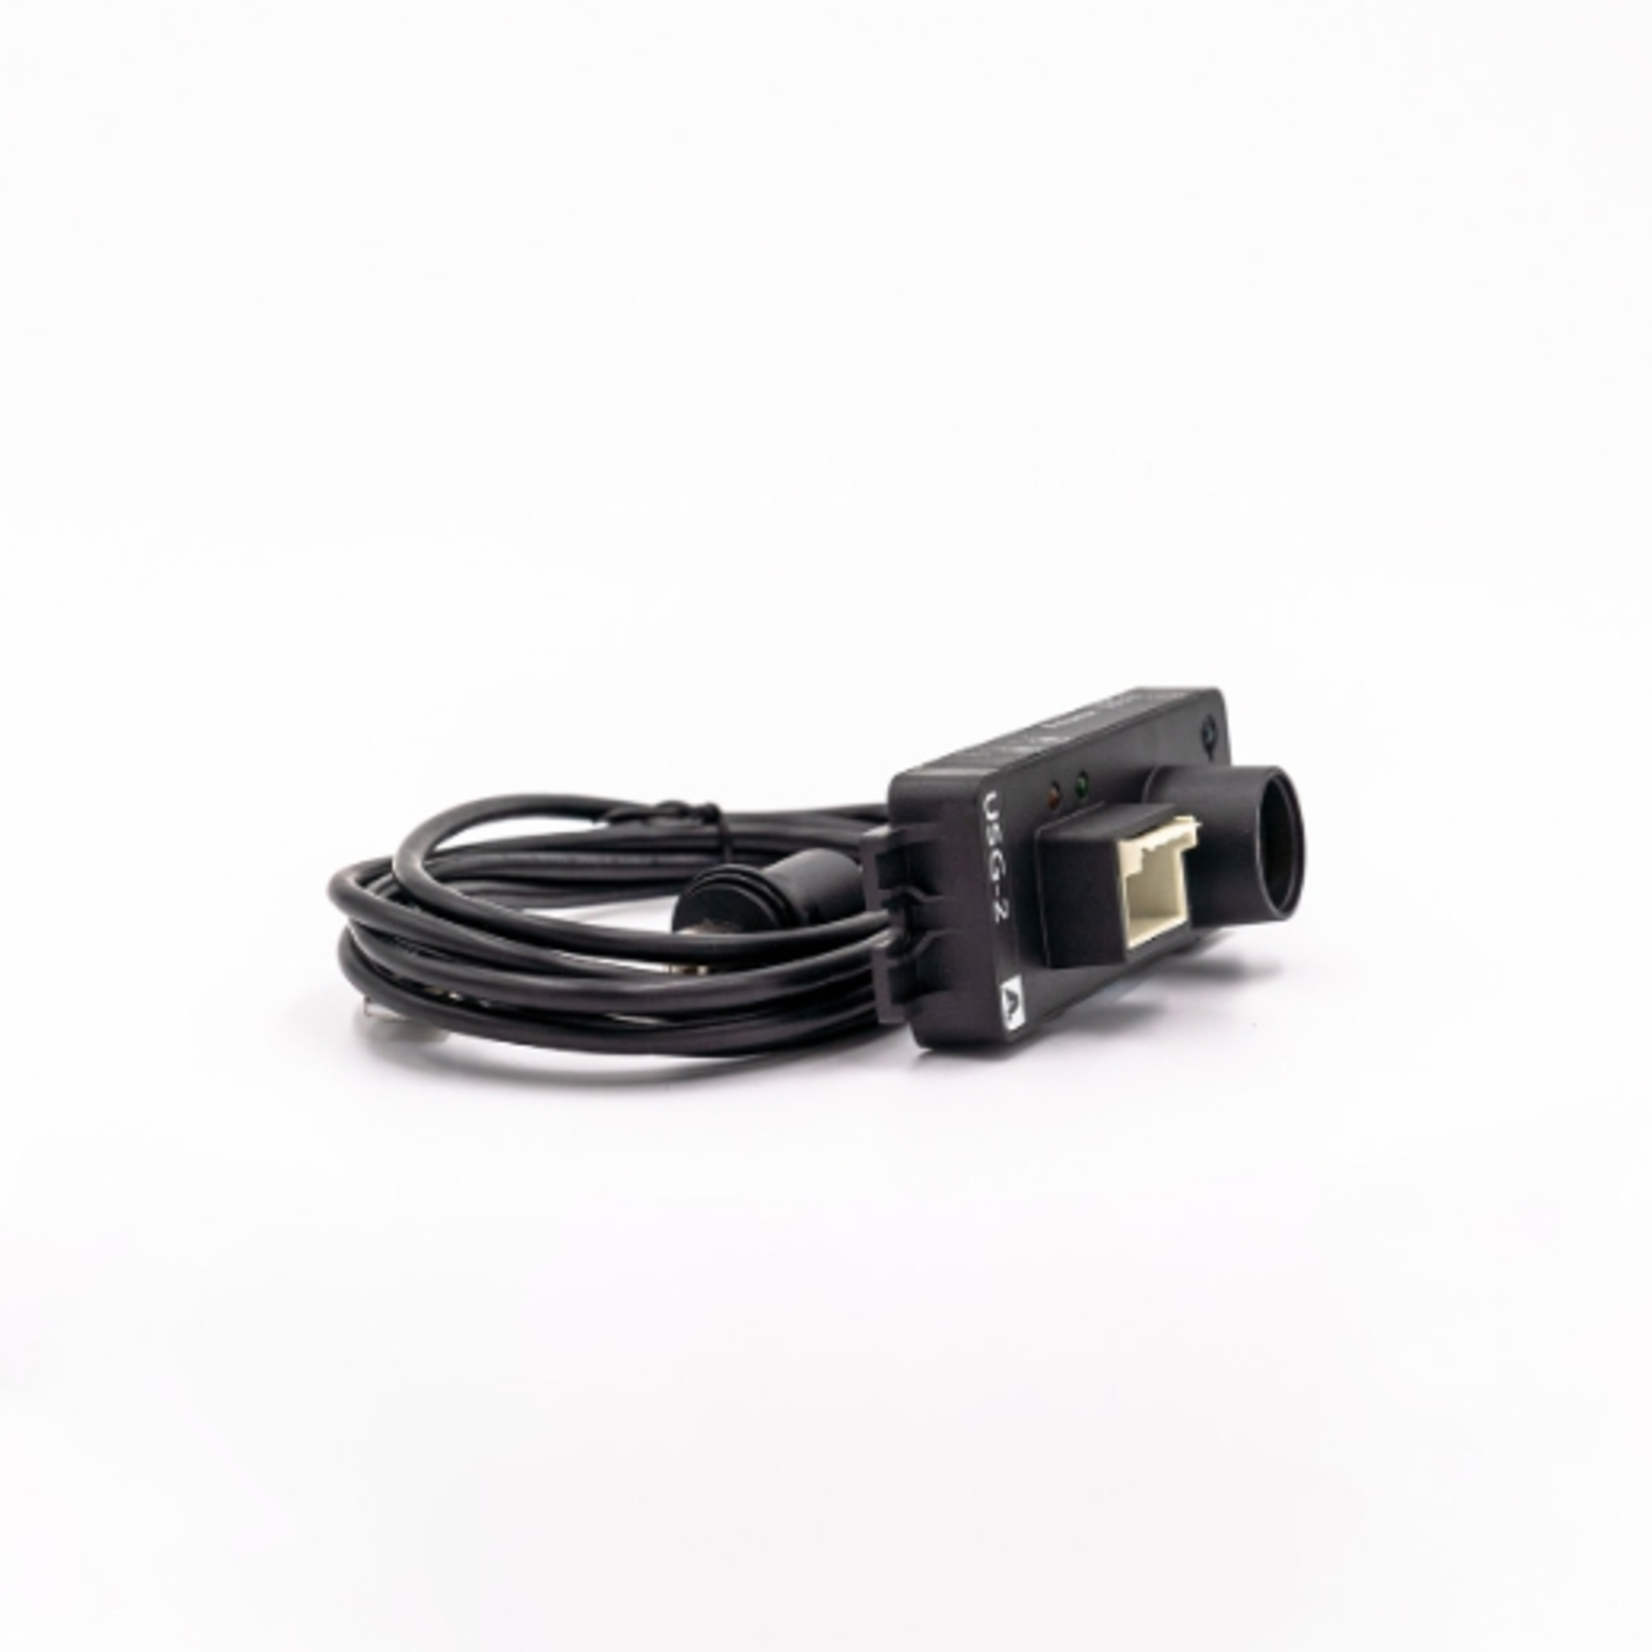 Actisense Isolated USB To Serial Gateway for use with NMEA 0183, RS422 and RS232